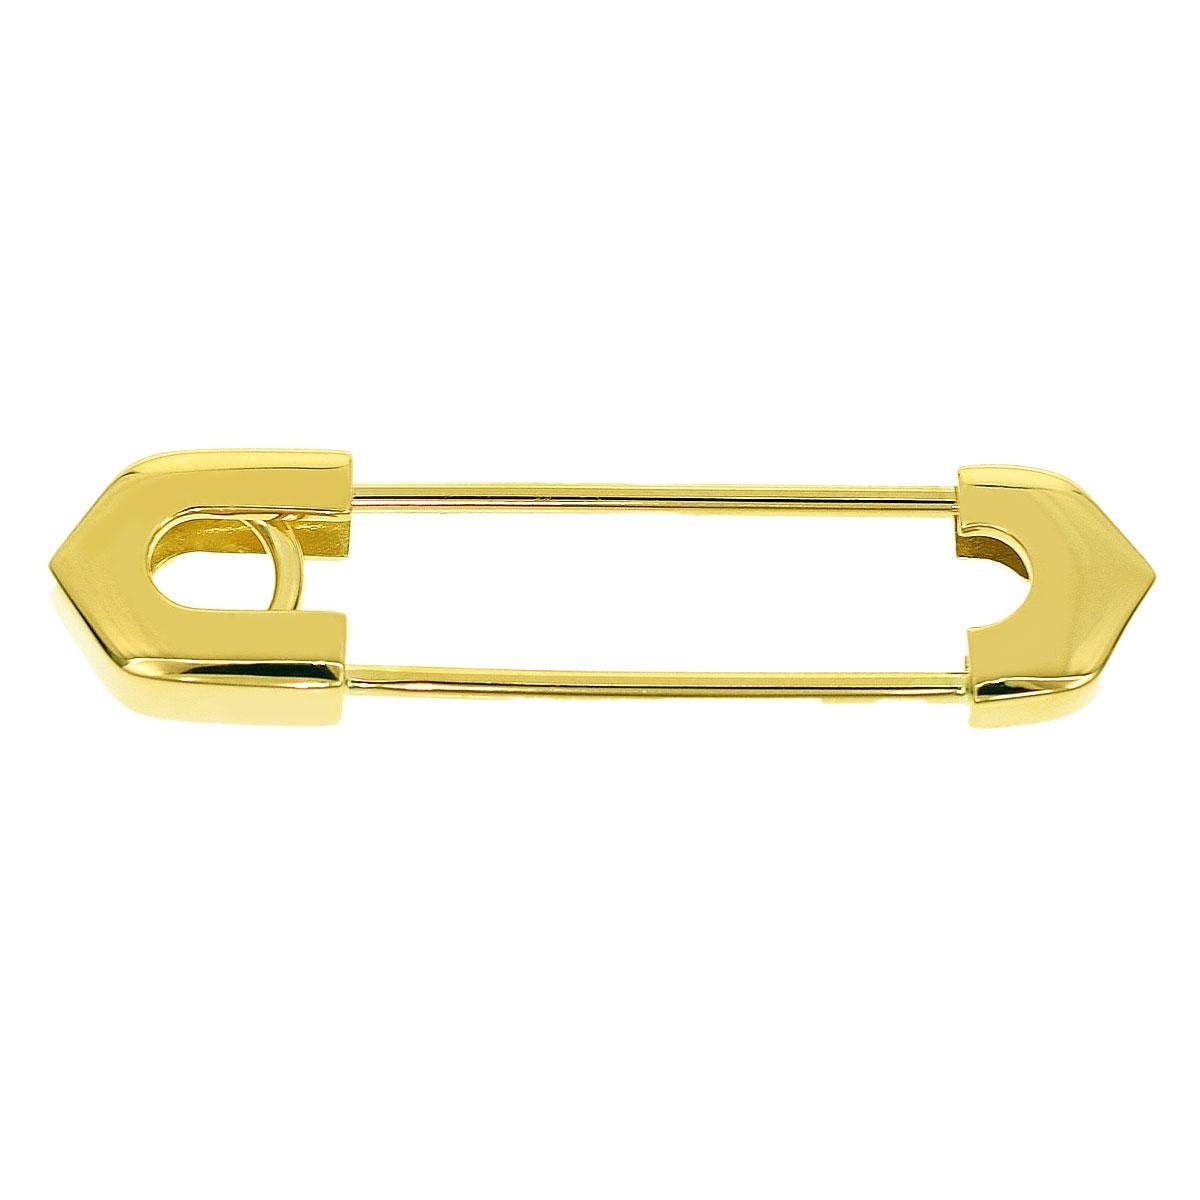 Brand:Cartier
Name:Pin brooch
Material:750 K18 YG yellow gold
Weight:3.1g（Approx）
Size（inch）:H36mm×W8mm / H1.41in×W0.31in（Approx）
Comes with:Cartier box, case